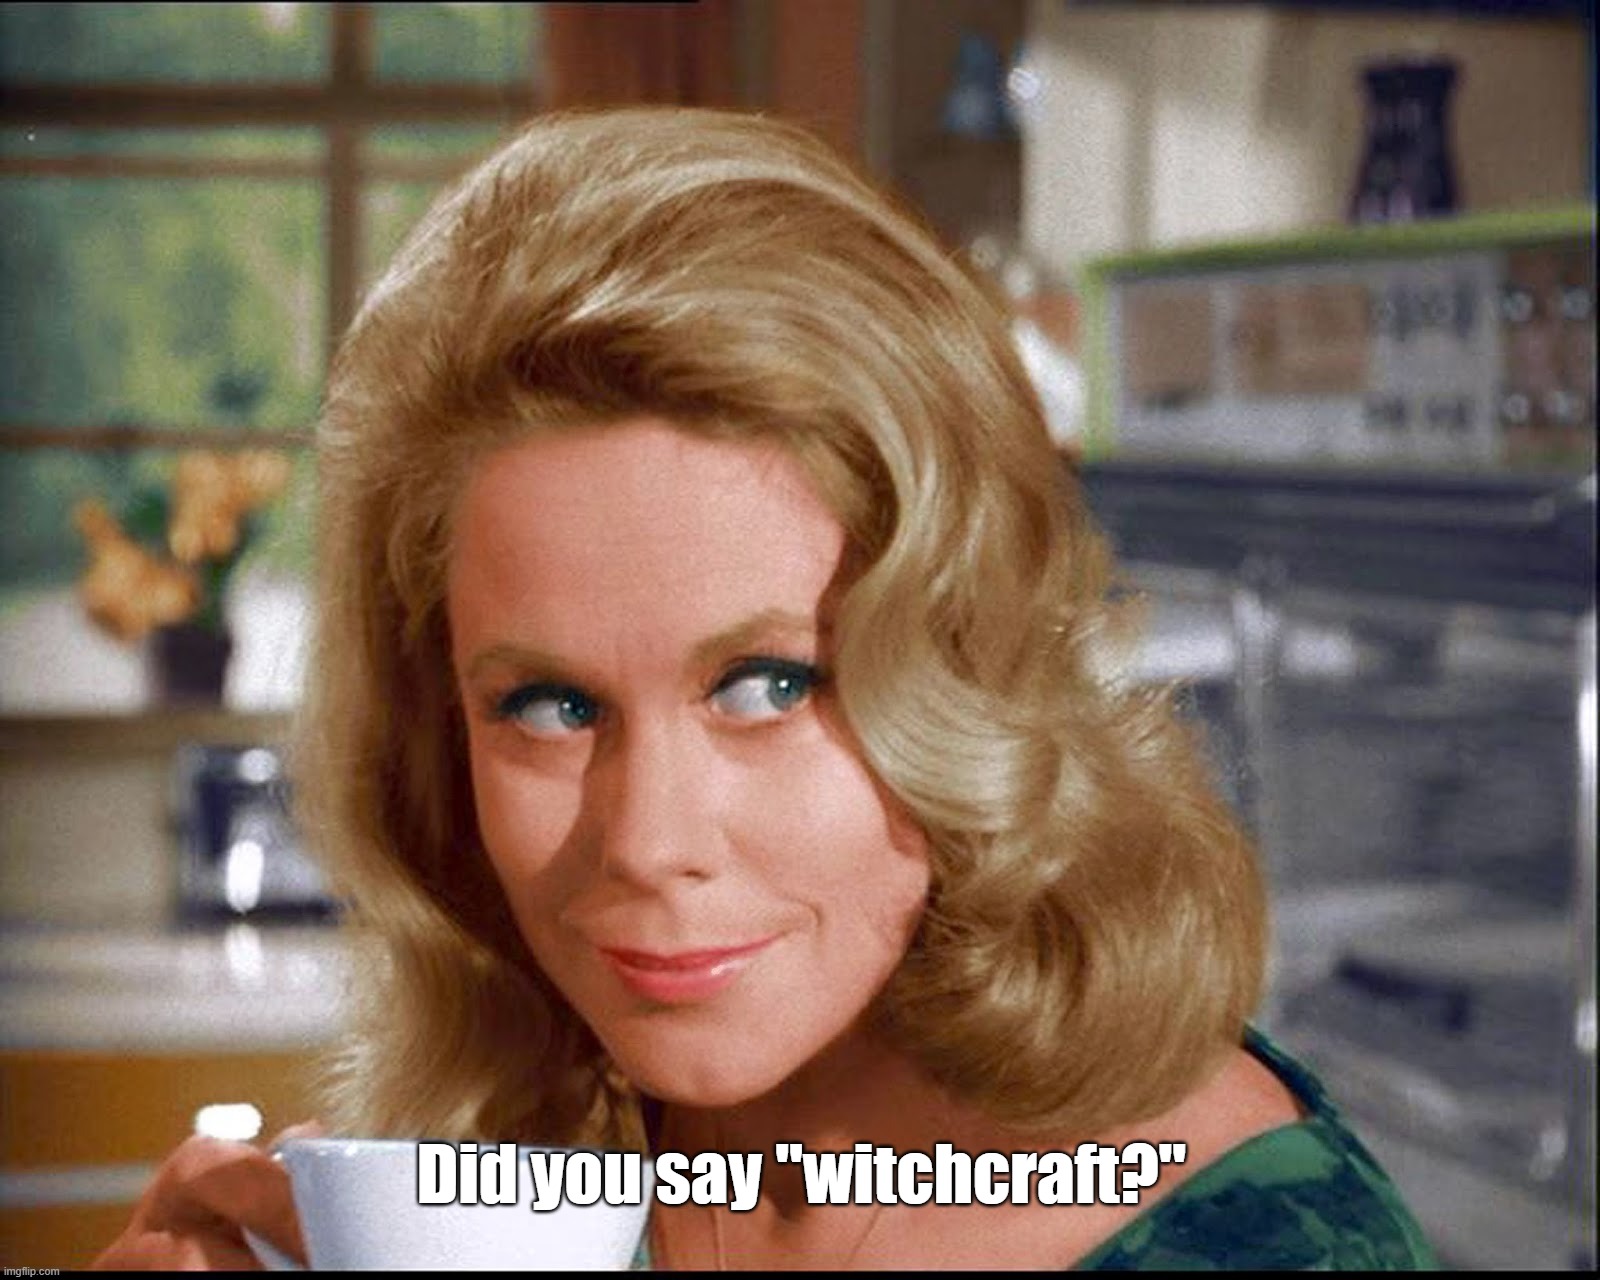 Samantha bewitched | Did you say "witchcraft?" | image tagged in samantha bewitched | made w/ Imgflip meme maker